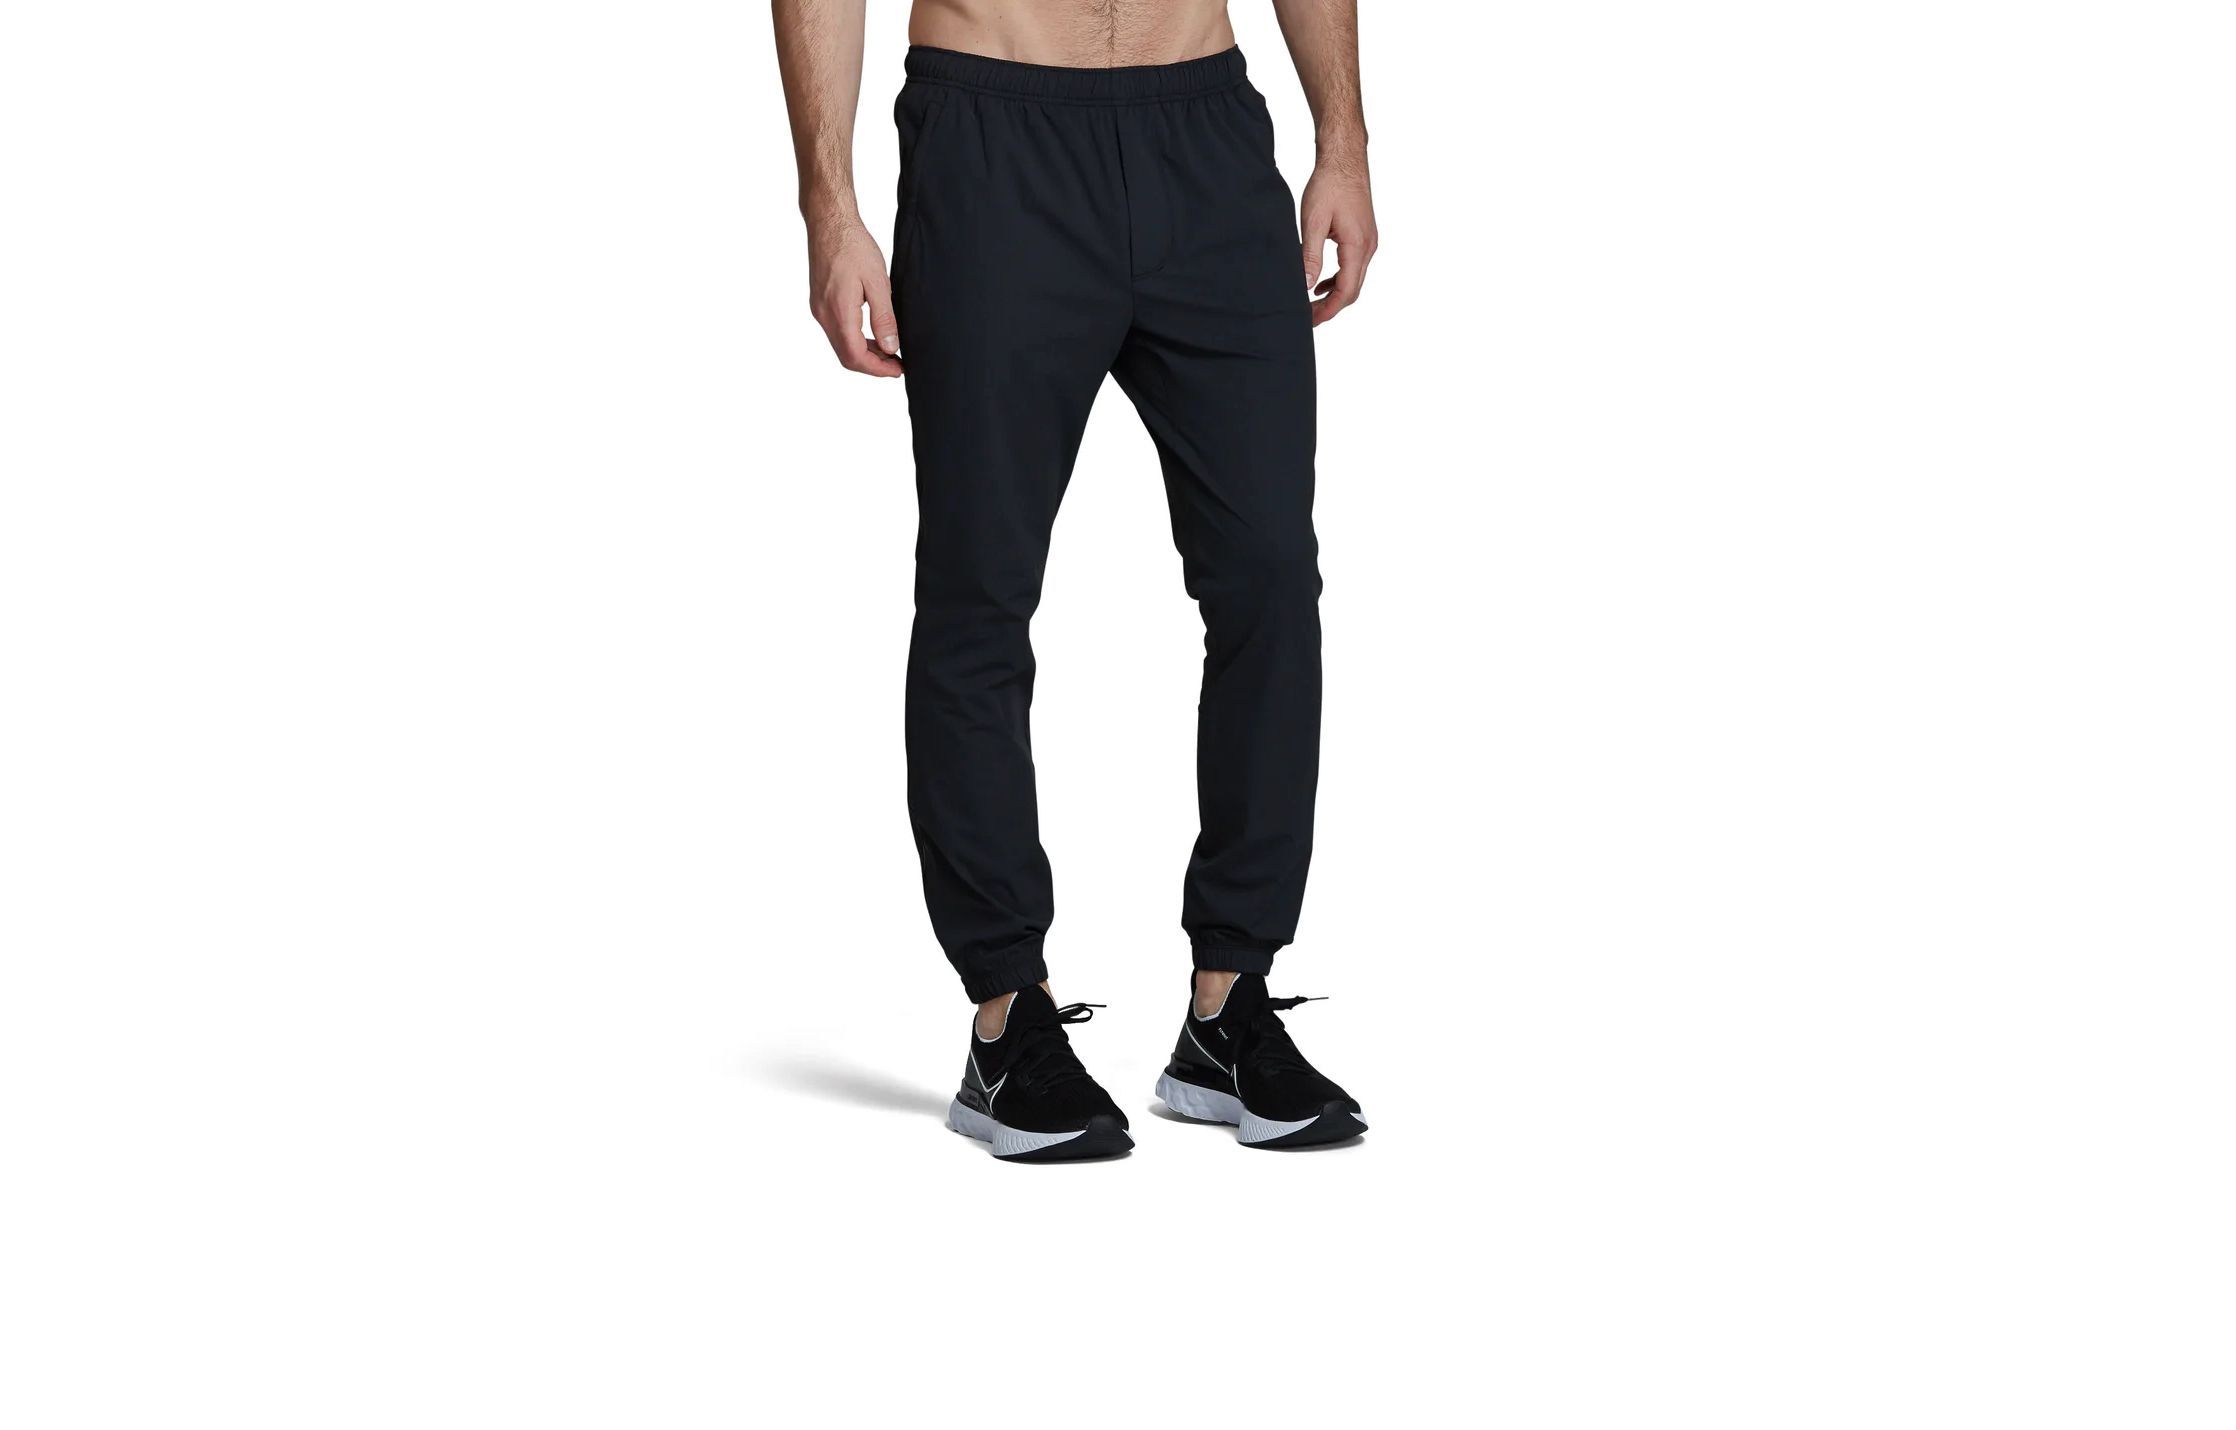 HAVANSIDY Mens Gym Pants Joggers Running Sweatpants Active Trousers Multifunctional Pockets 